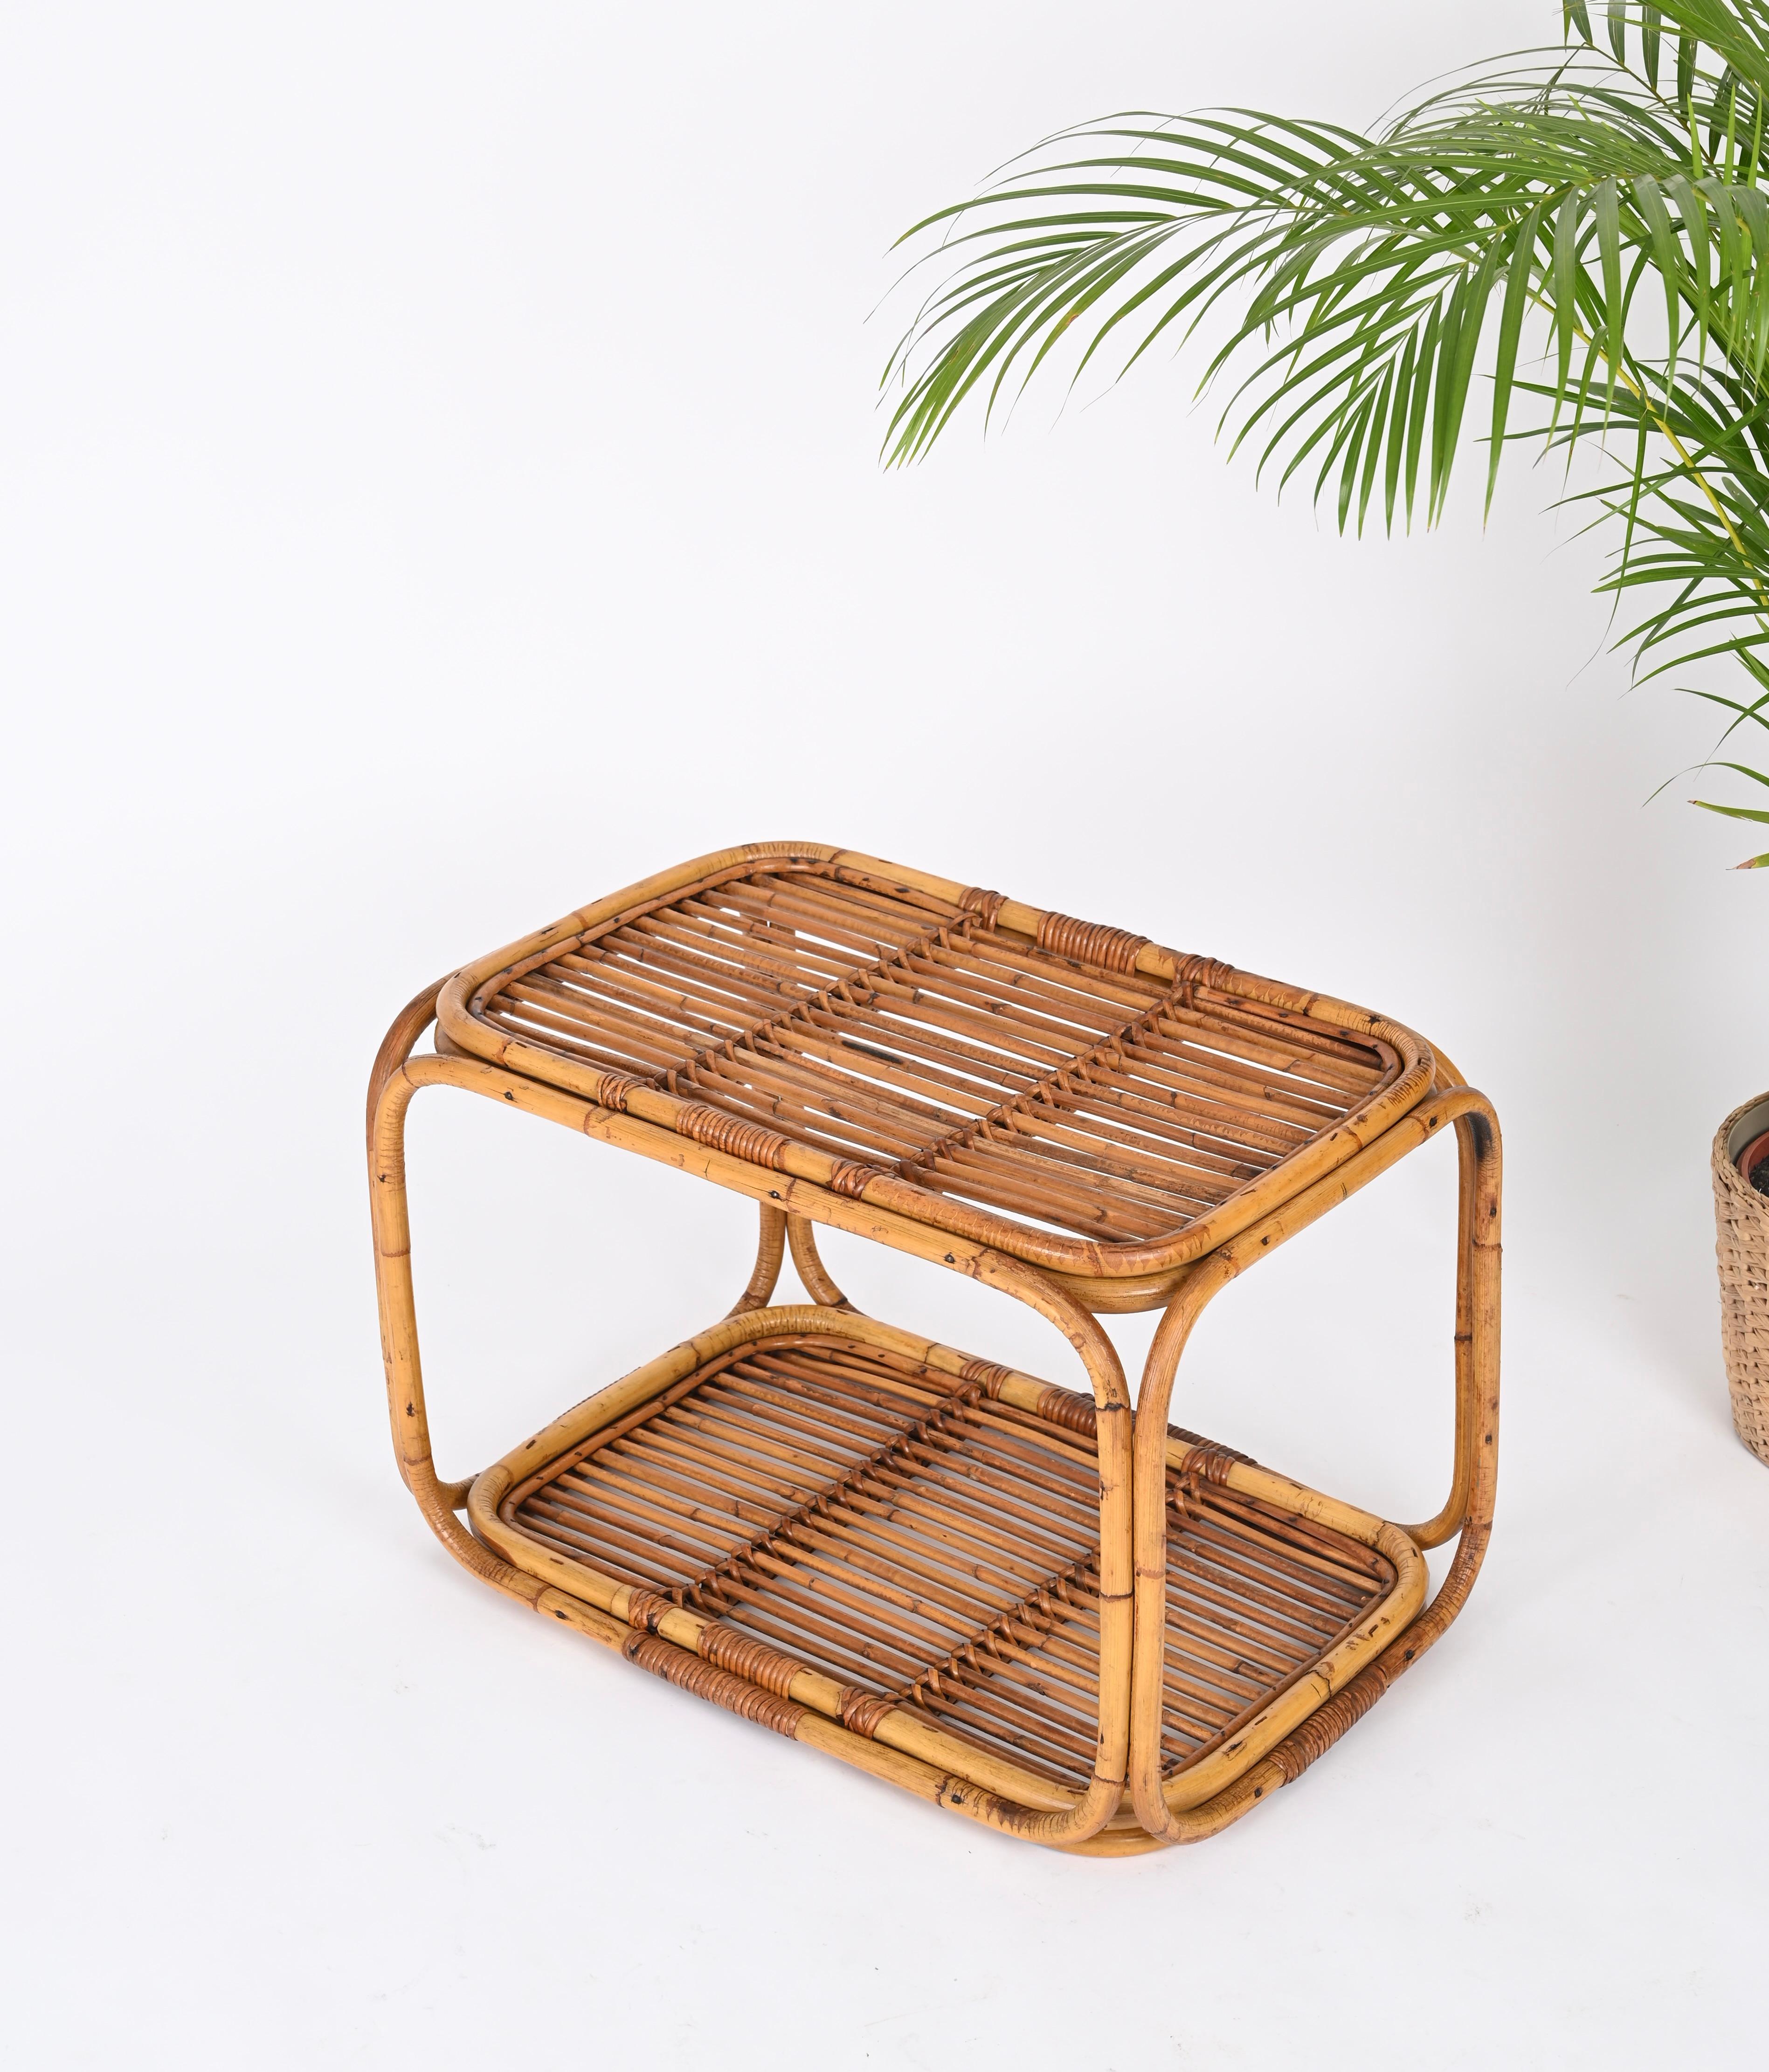 Hand-Woven Midcentury Bamboo and Rattan Italian Rectangular Coffee Table, 1960s For Sale